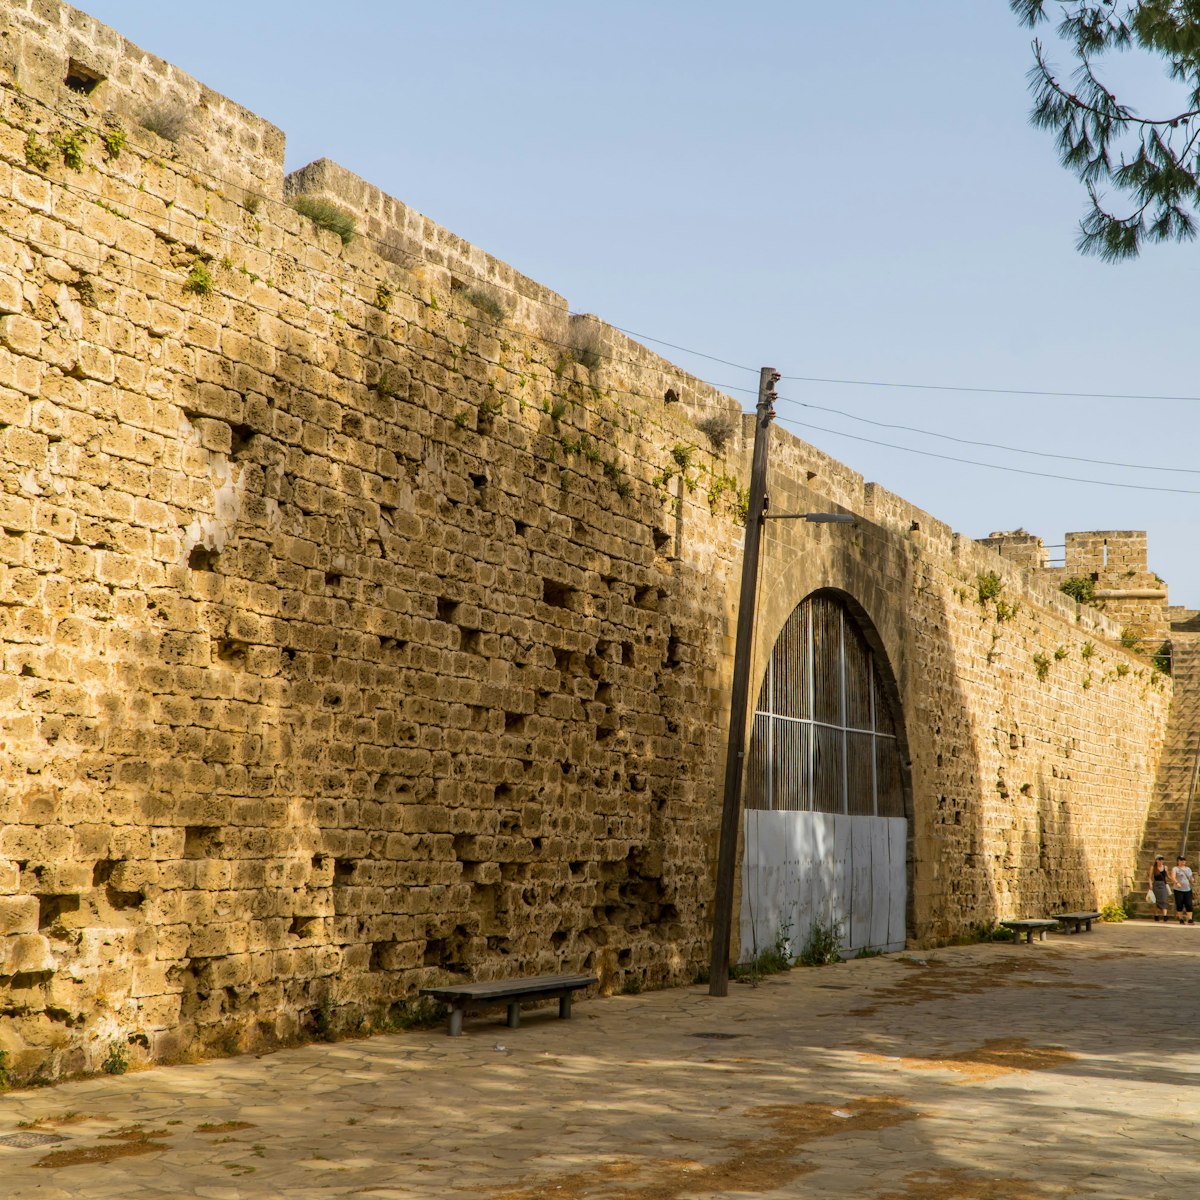 The stone city walls of Famagusta in Cyprus.